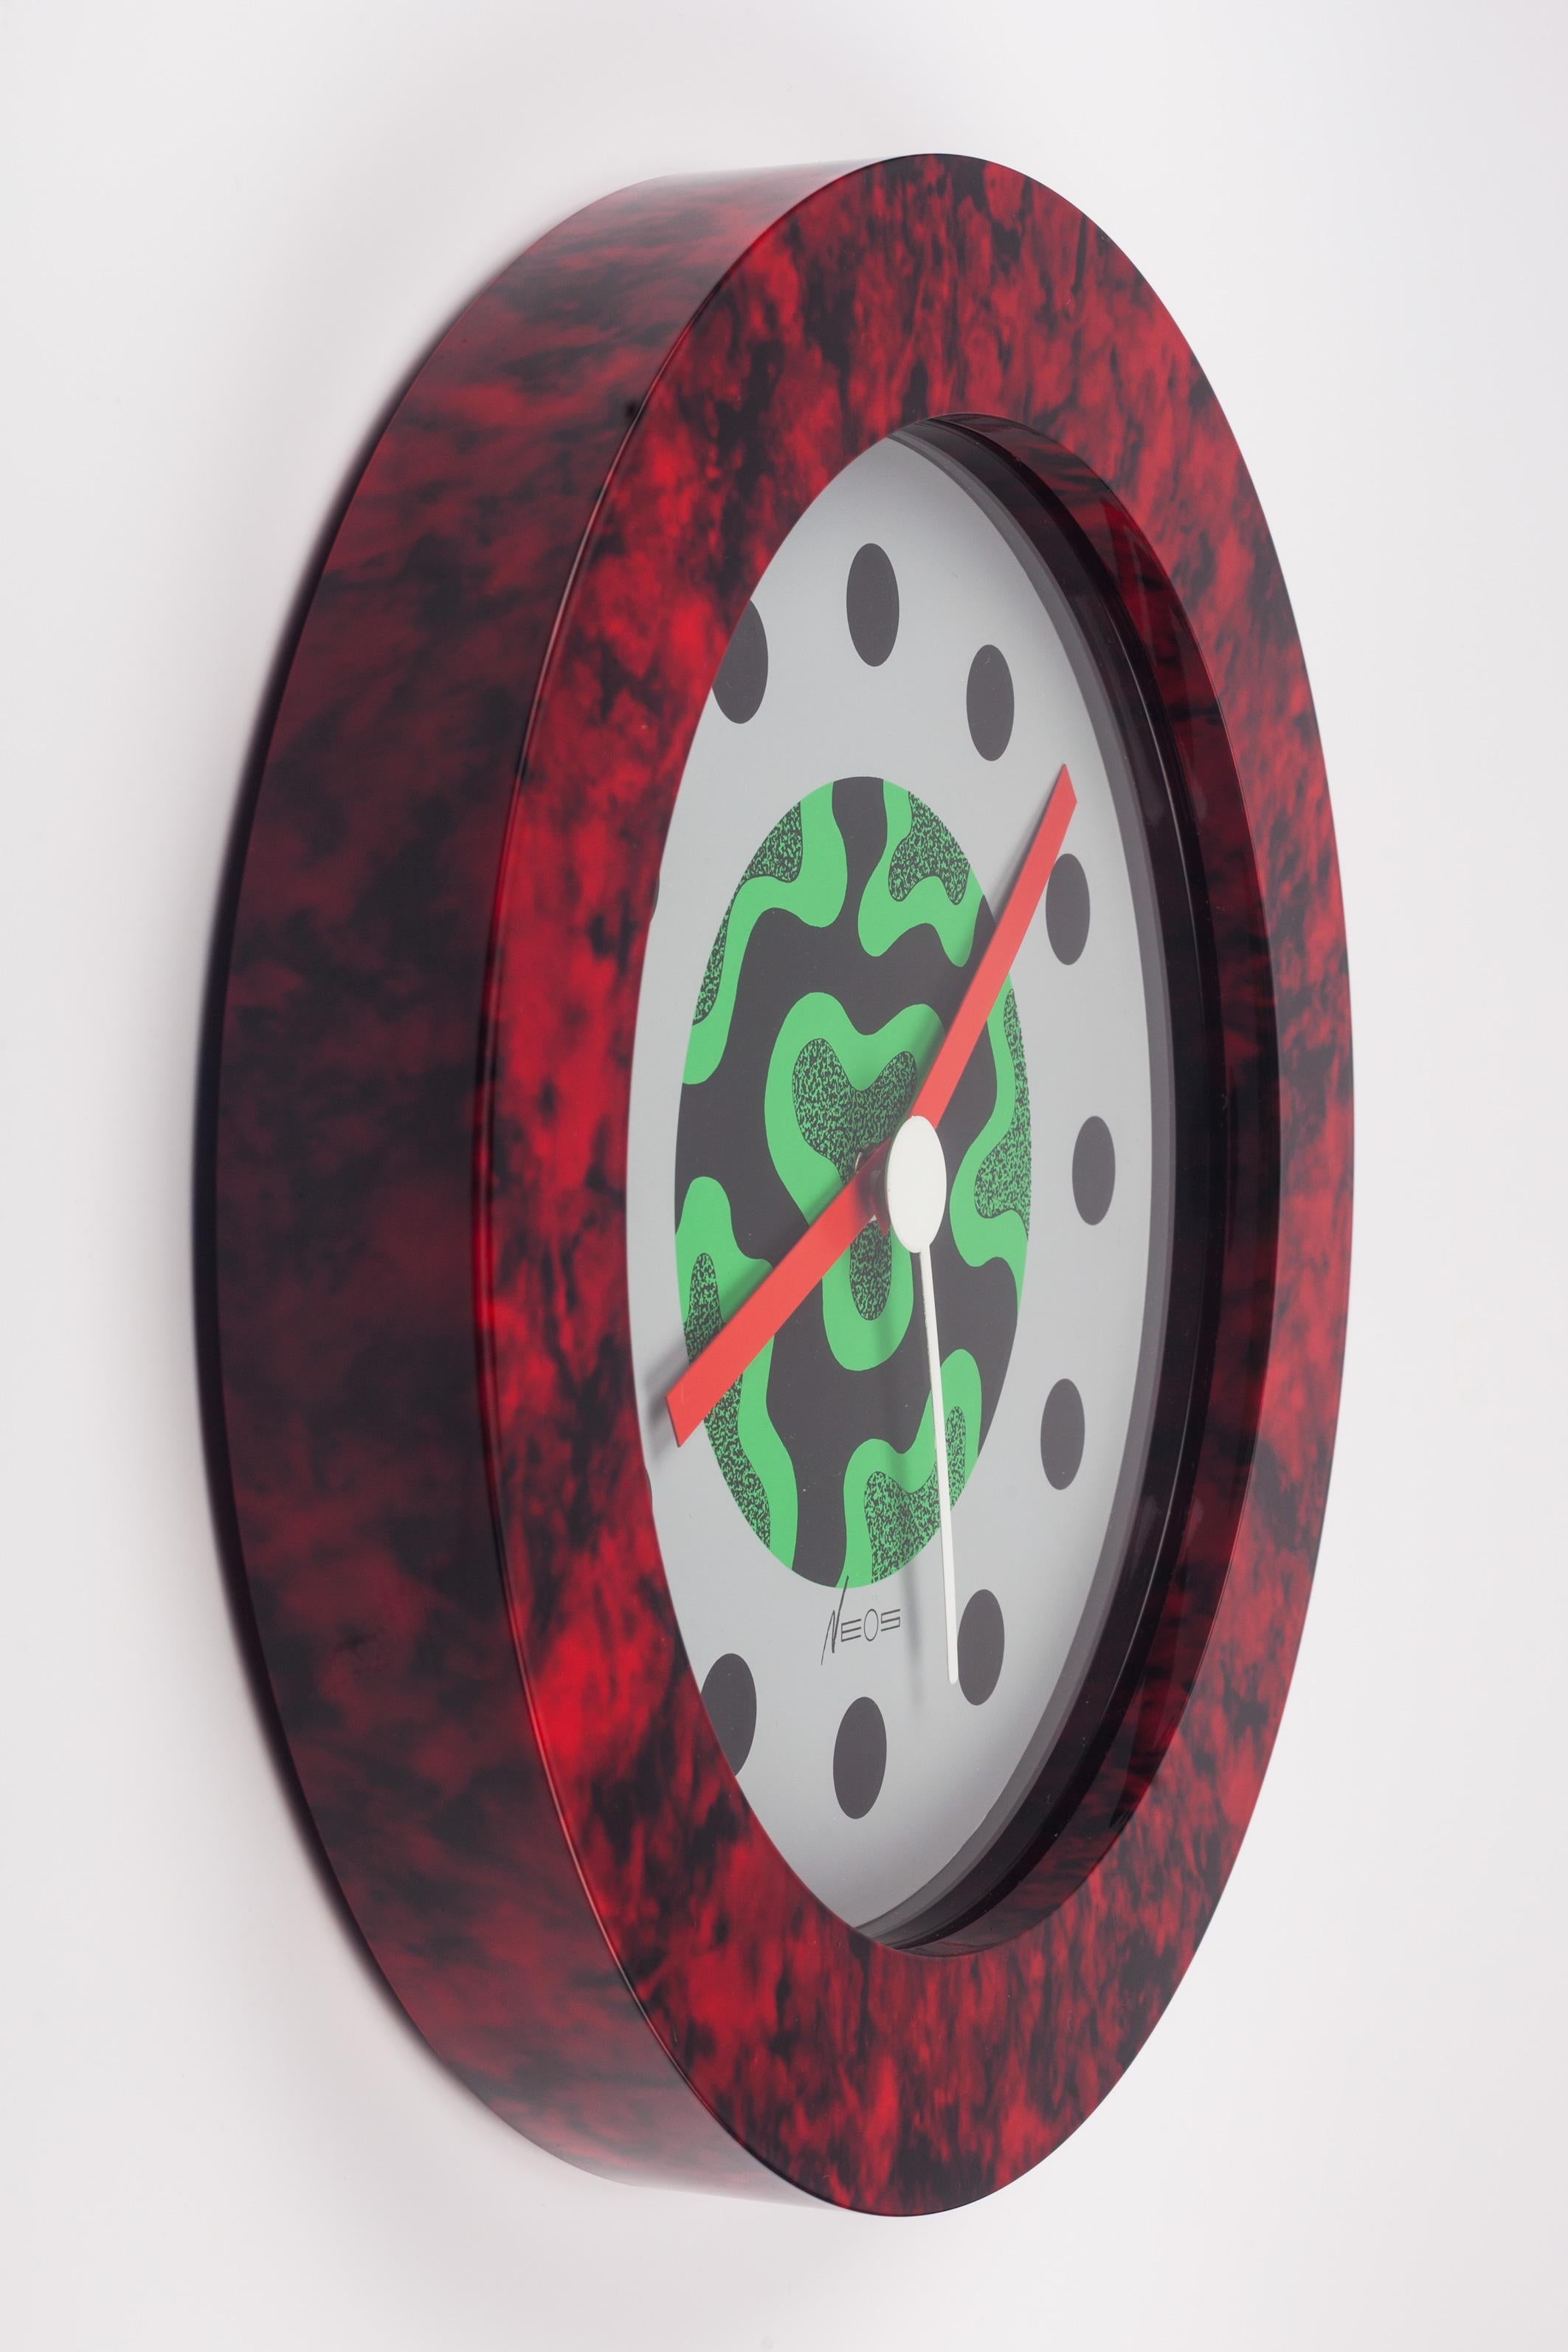 Red, black and green postmodern wall clock that is out of production. Designed by the Memphis Group founding members and couple, George Sowden and Nathalie du Pasquier in the 1980s. Expert use of contrasted colors and graphic design. Red and black